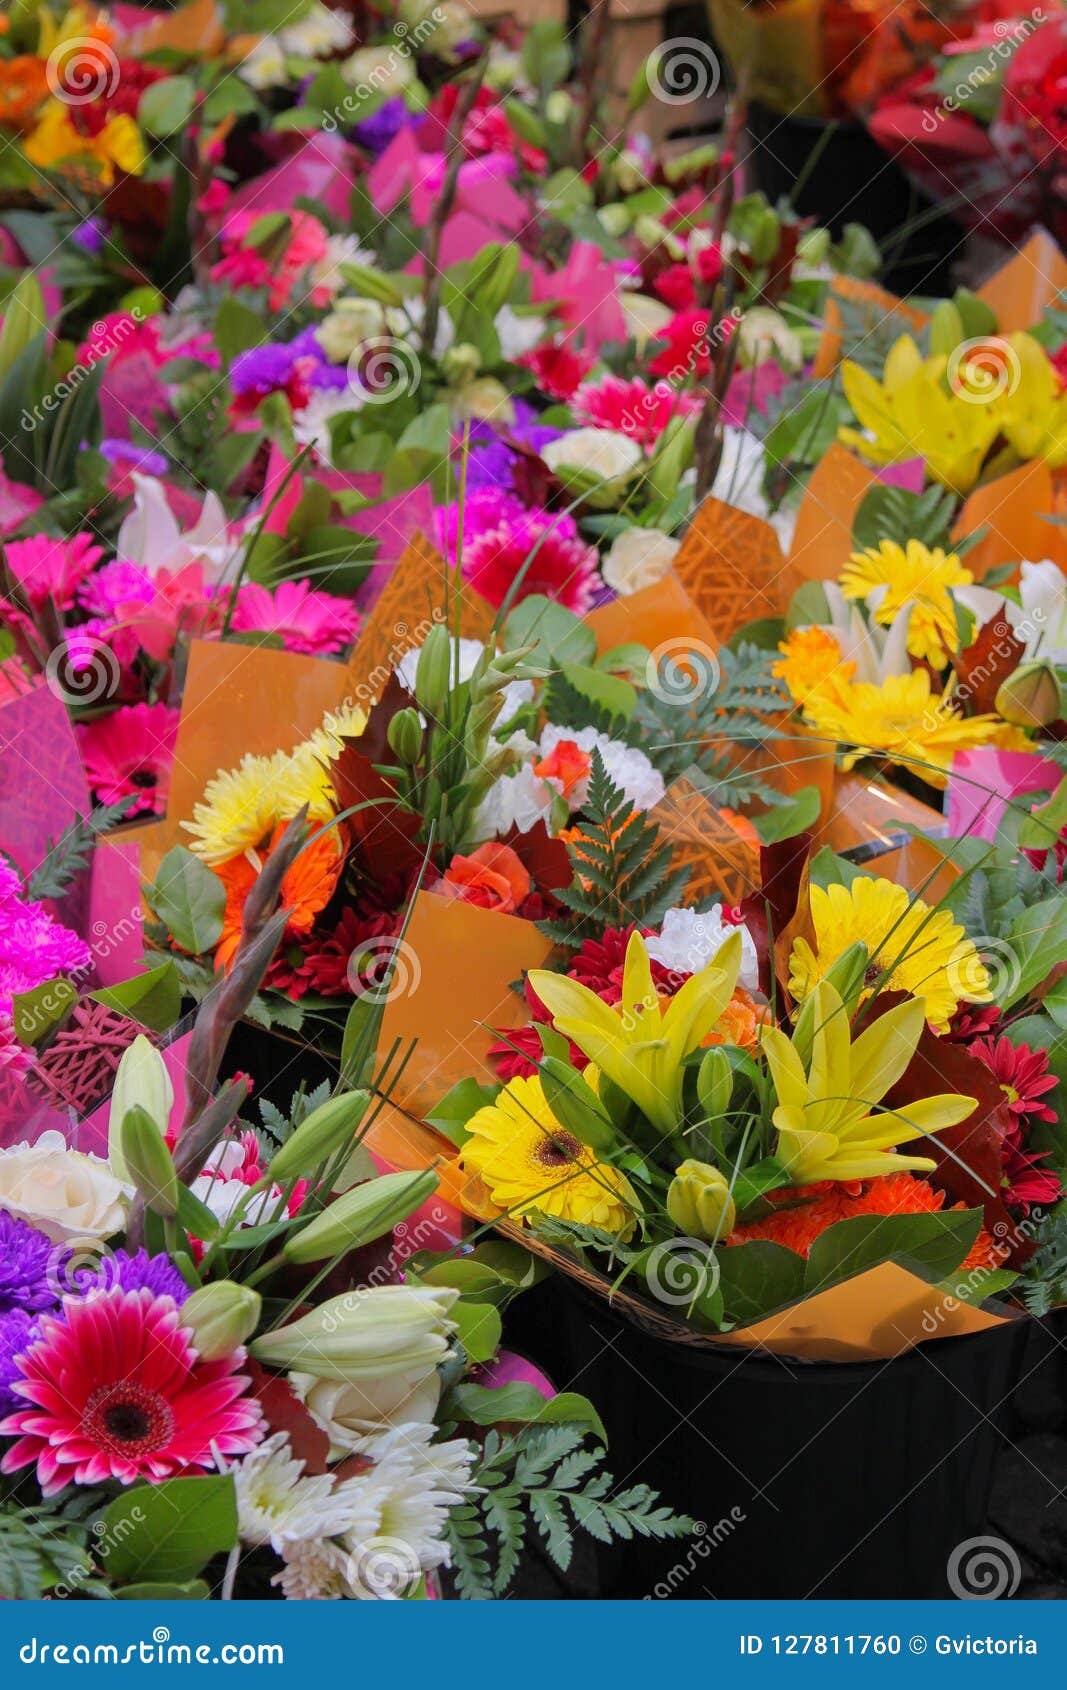 Outdoor Market Selling Different Colorful Flowers in Stockholm, Stock ...